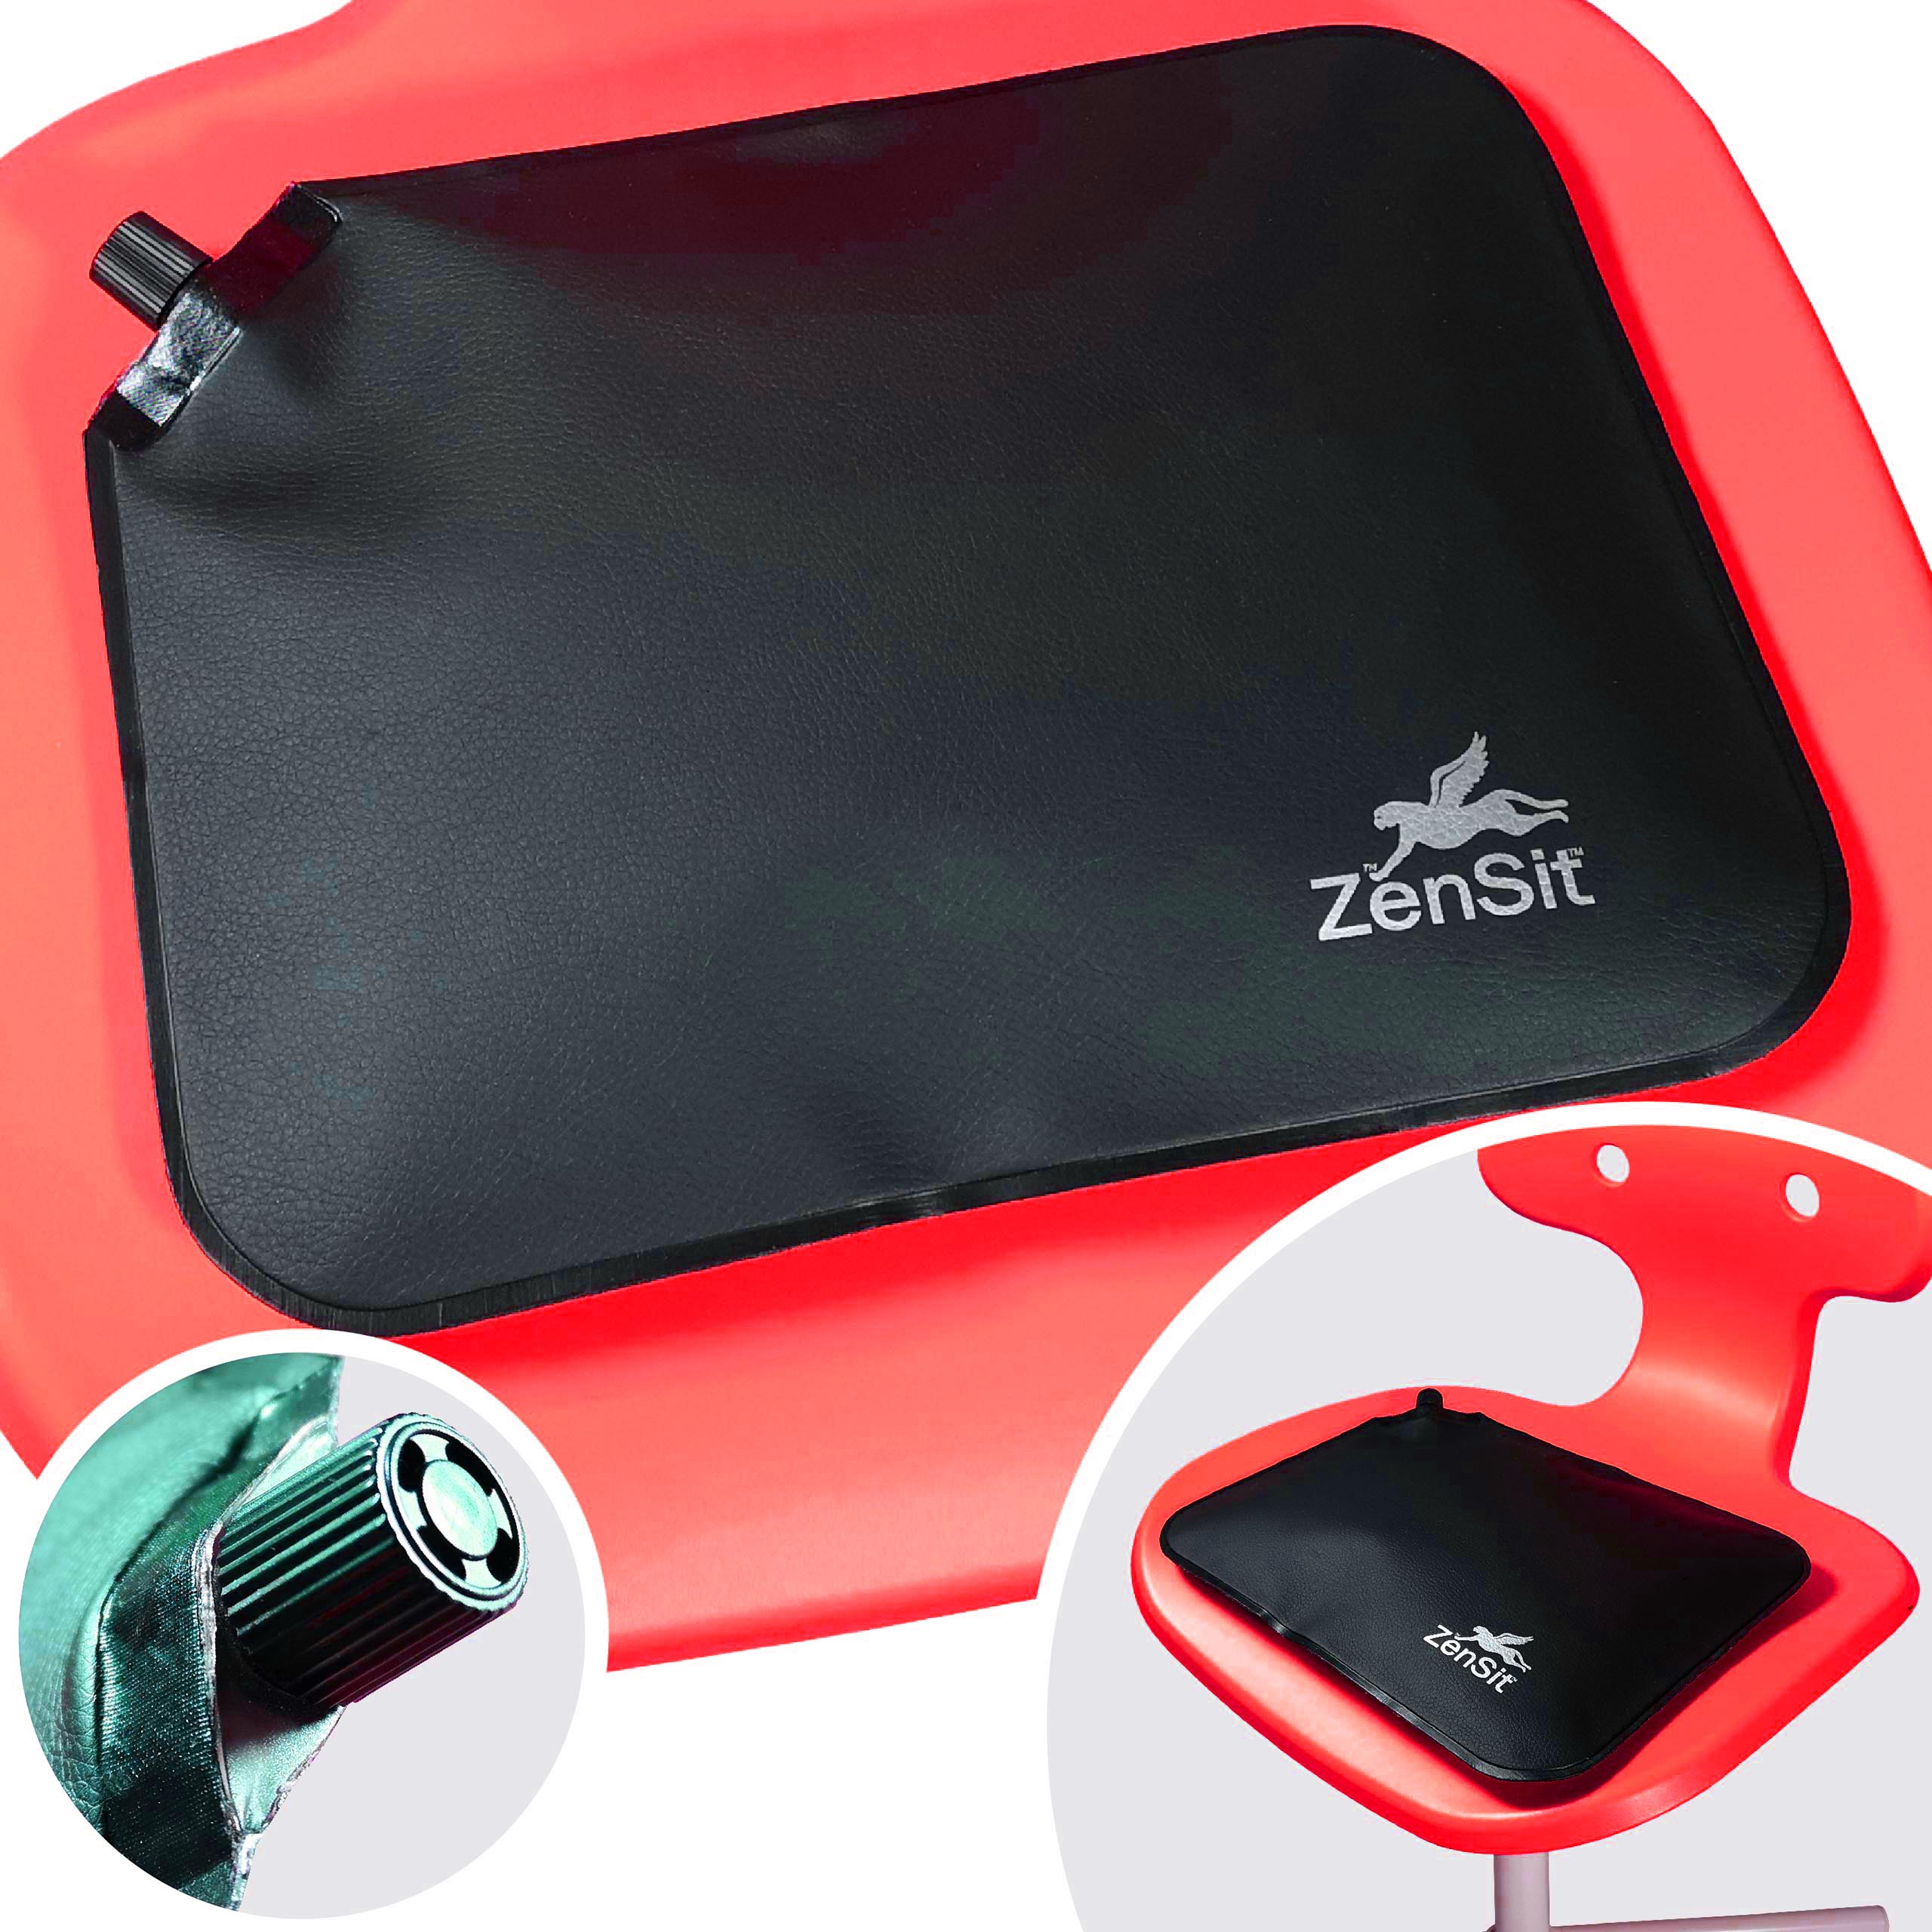 Therapy Seat Cushion for Attention Deficit Disorder (ADD)